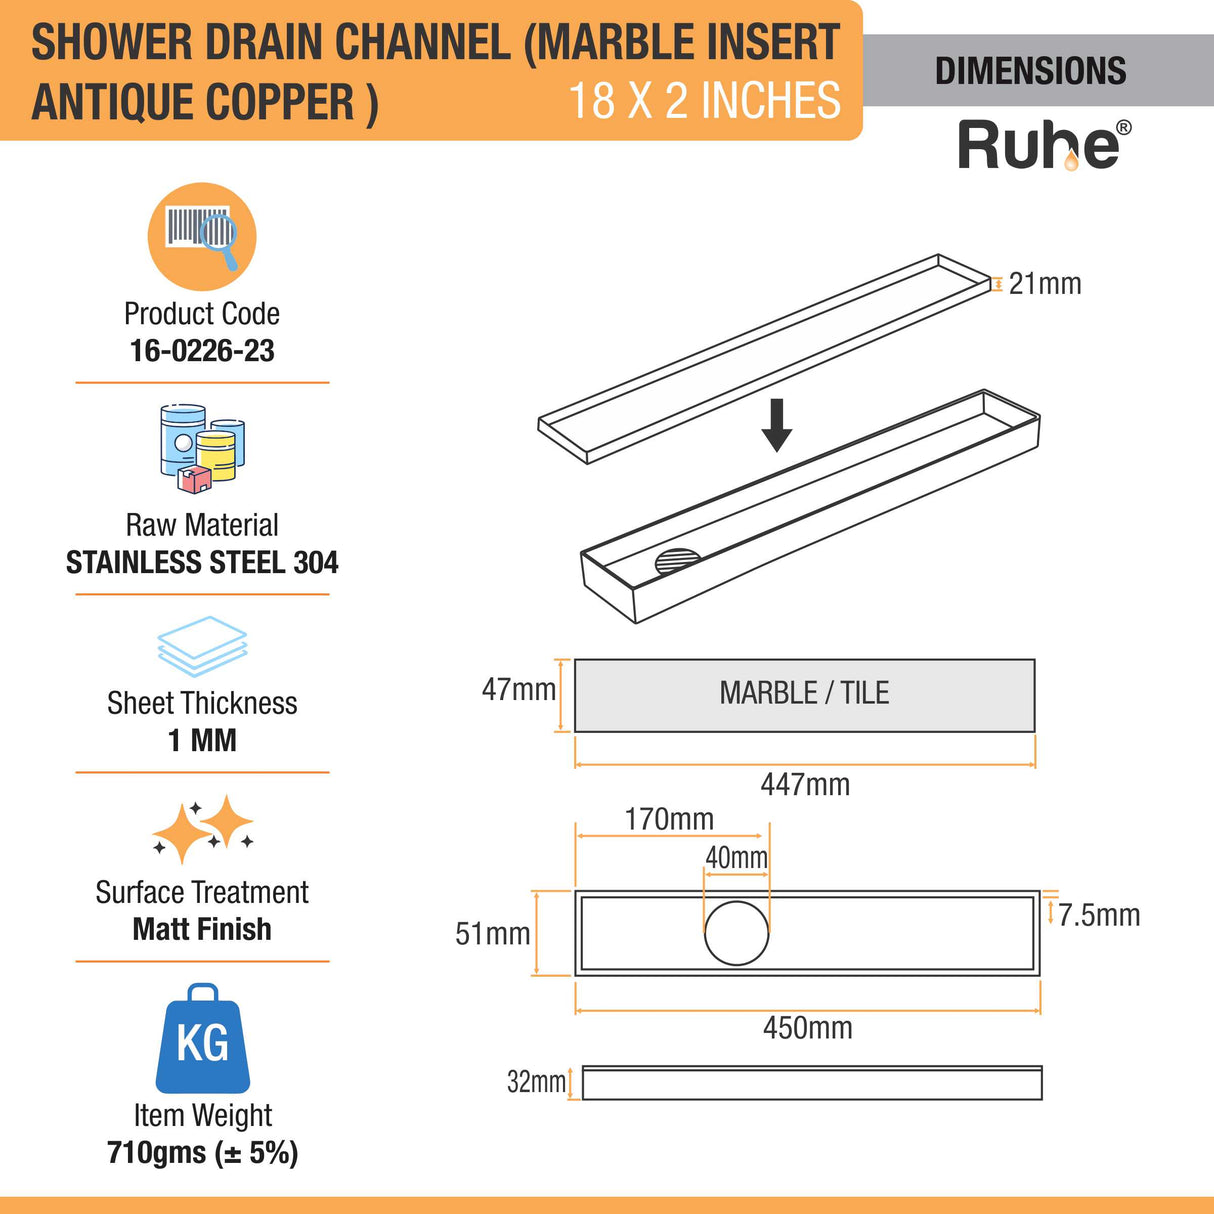 Marble Insert Shower Drain Channel (18 x 2 Inches) ANTIQUE COPPER dimensions and size